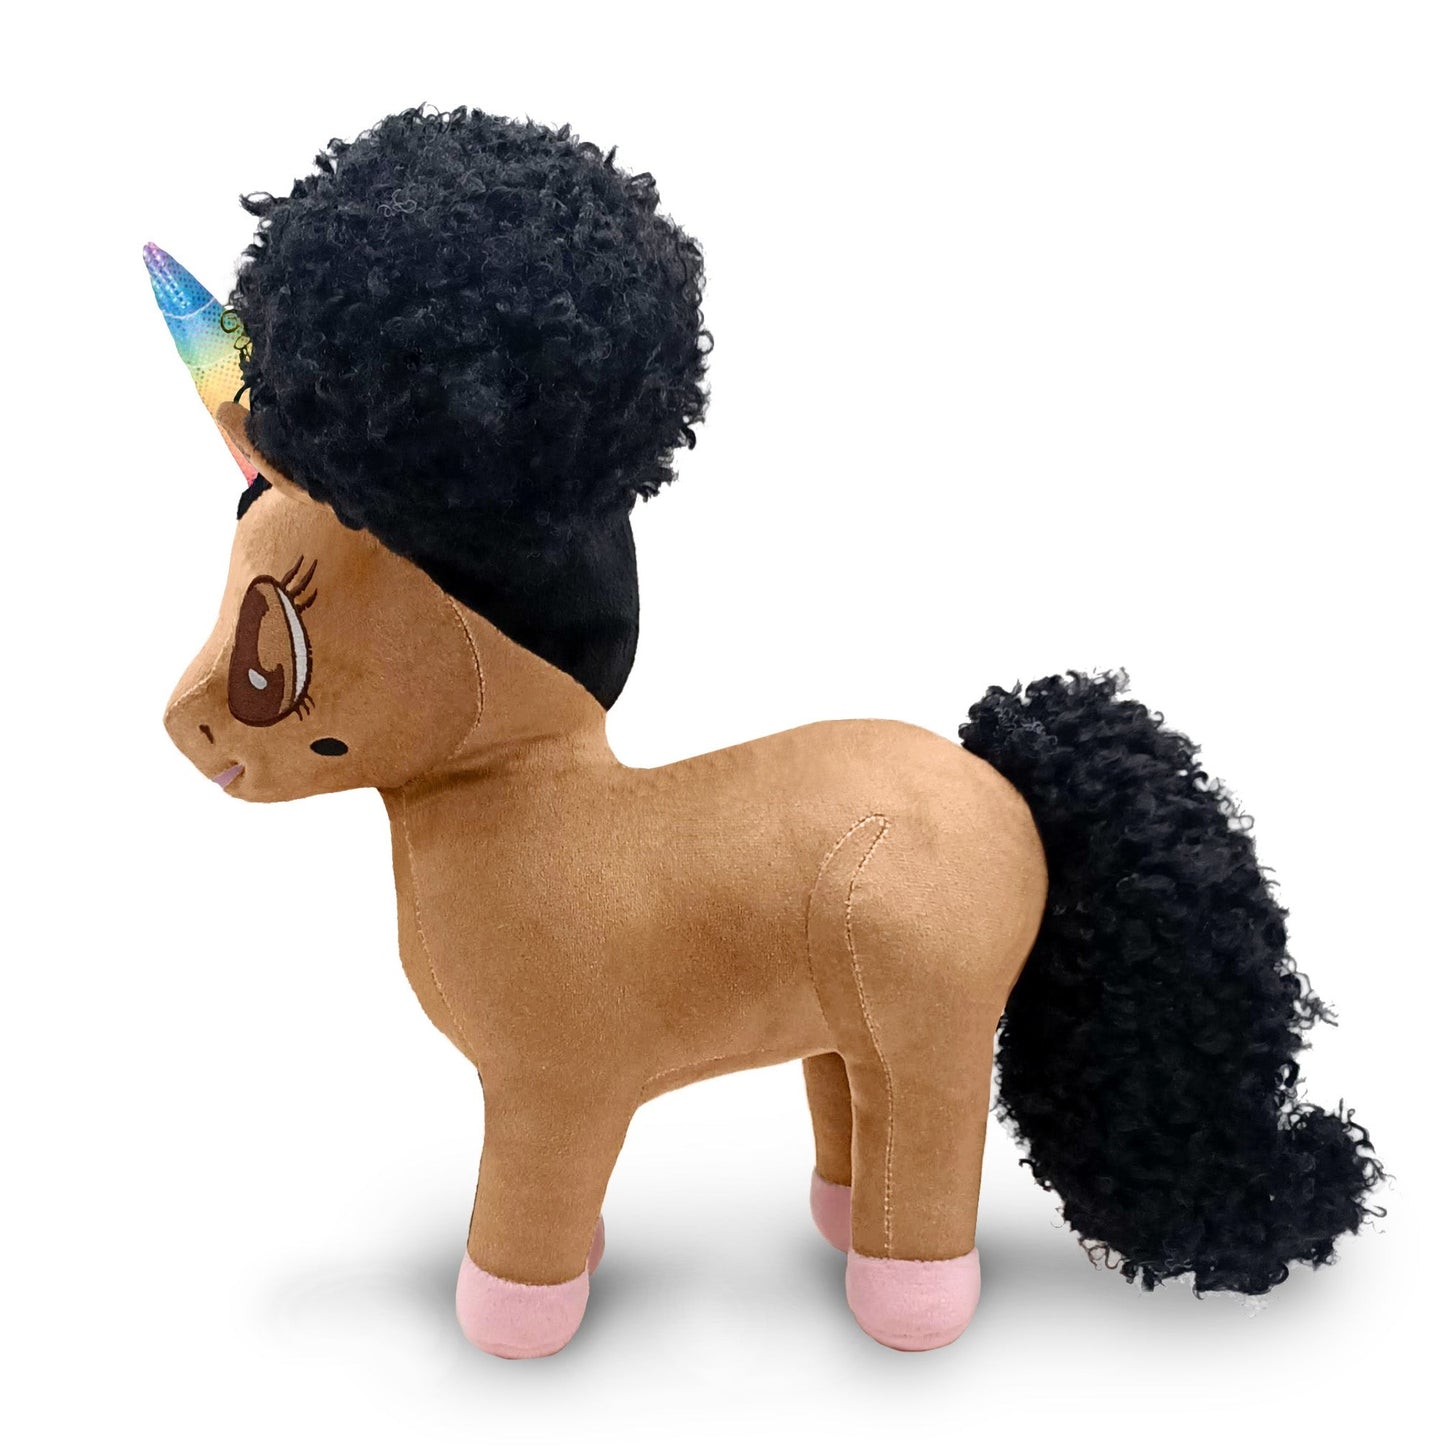 Brandy Unicorn Plush Toy with Afro Puffs - 15 inch